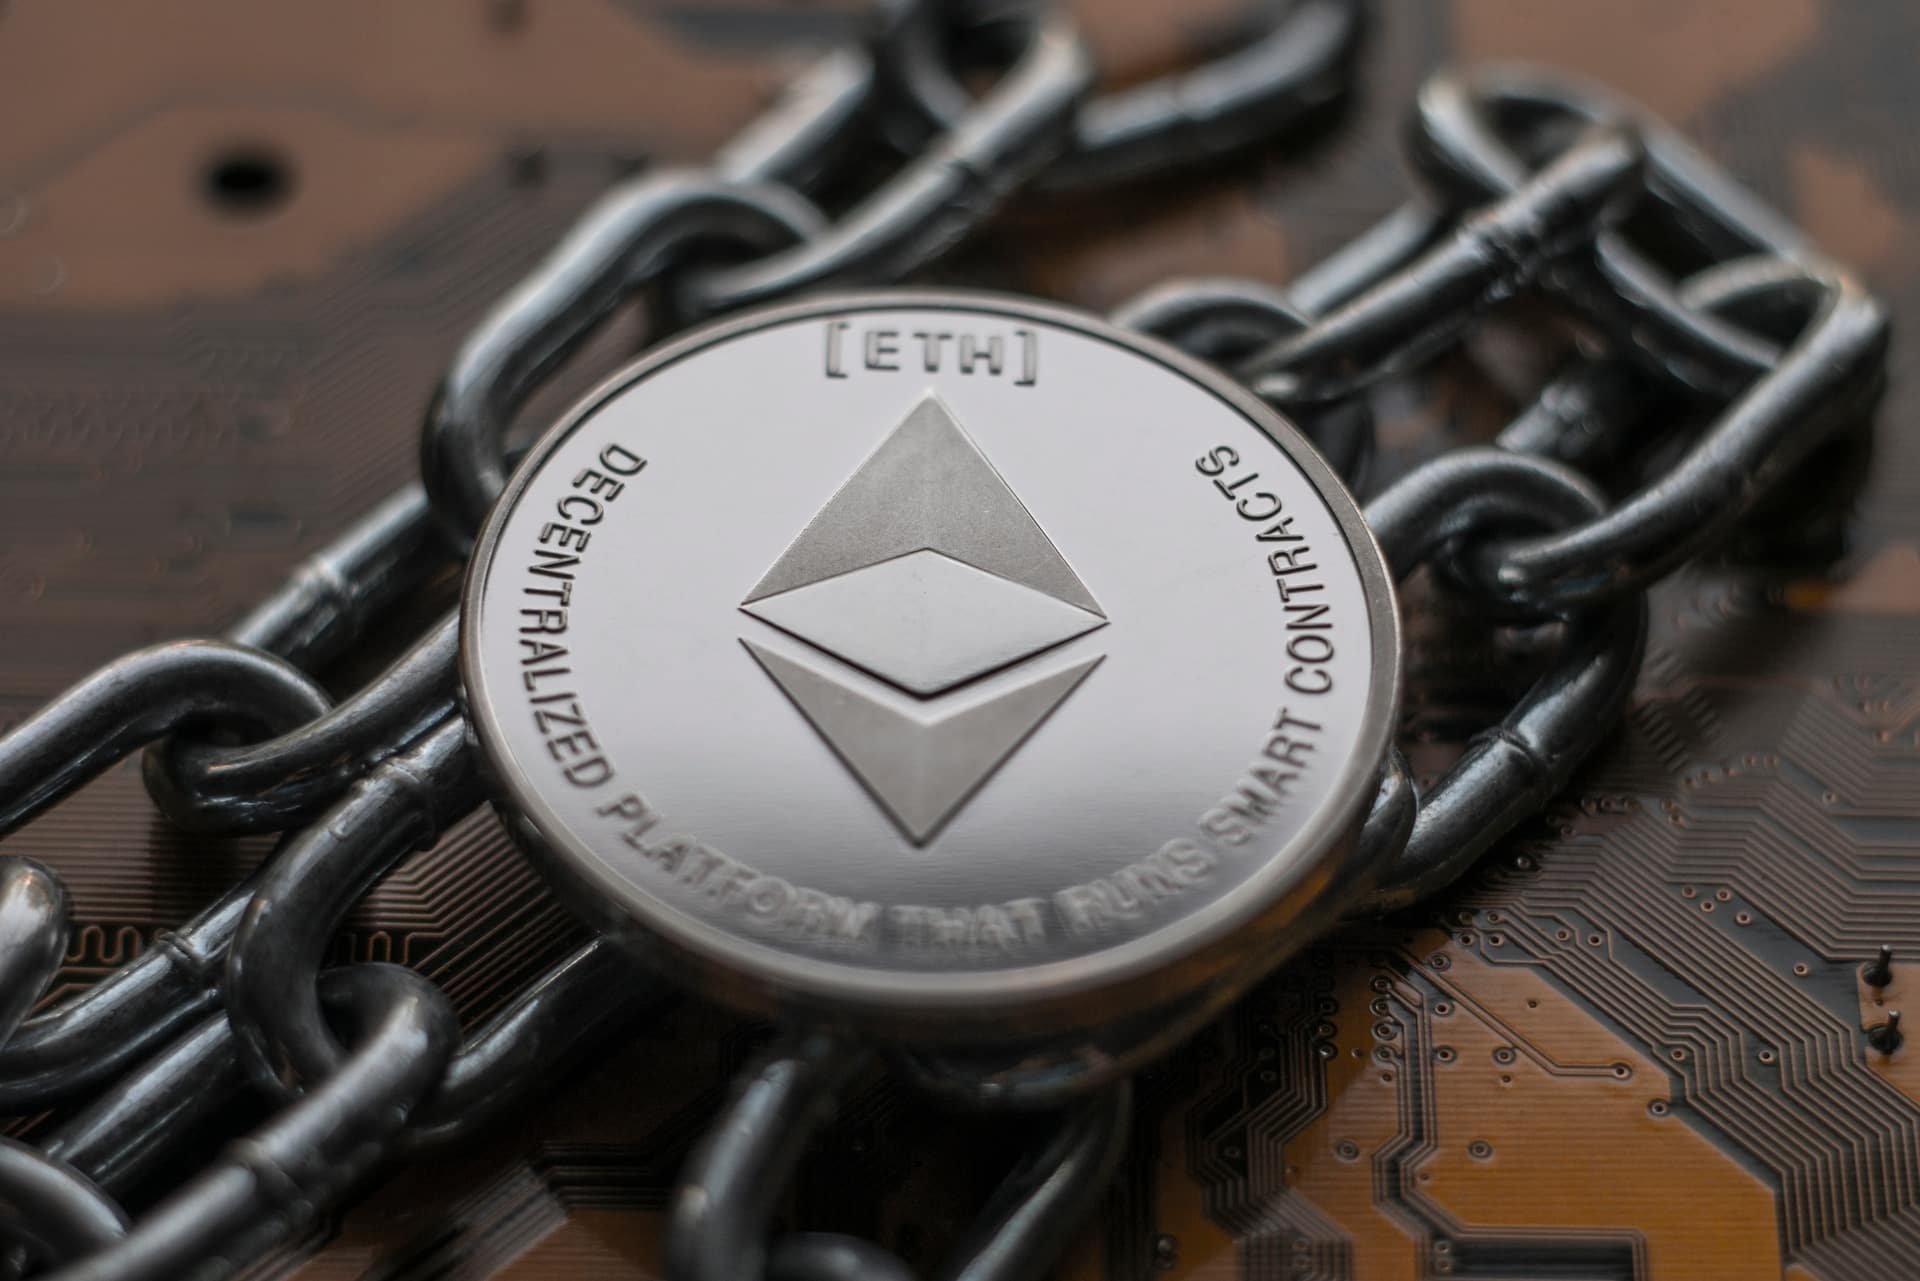 Steven Nerayoff Lawsuits Will Reveal Facts Supporting Claims Against Key Ethereum Figures, Says Attorney